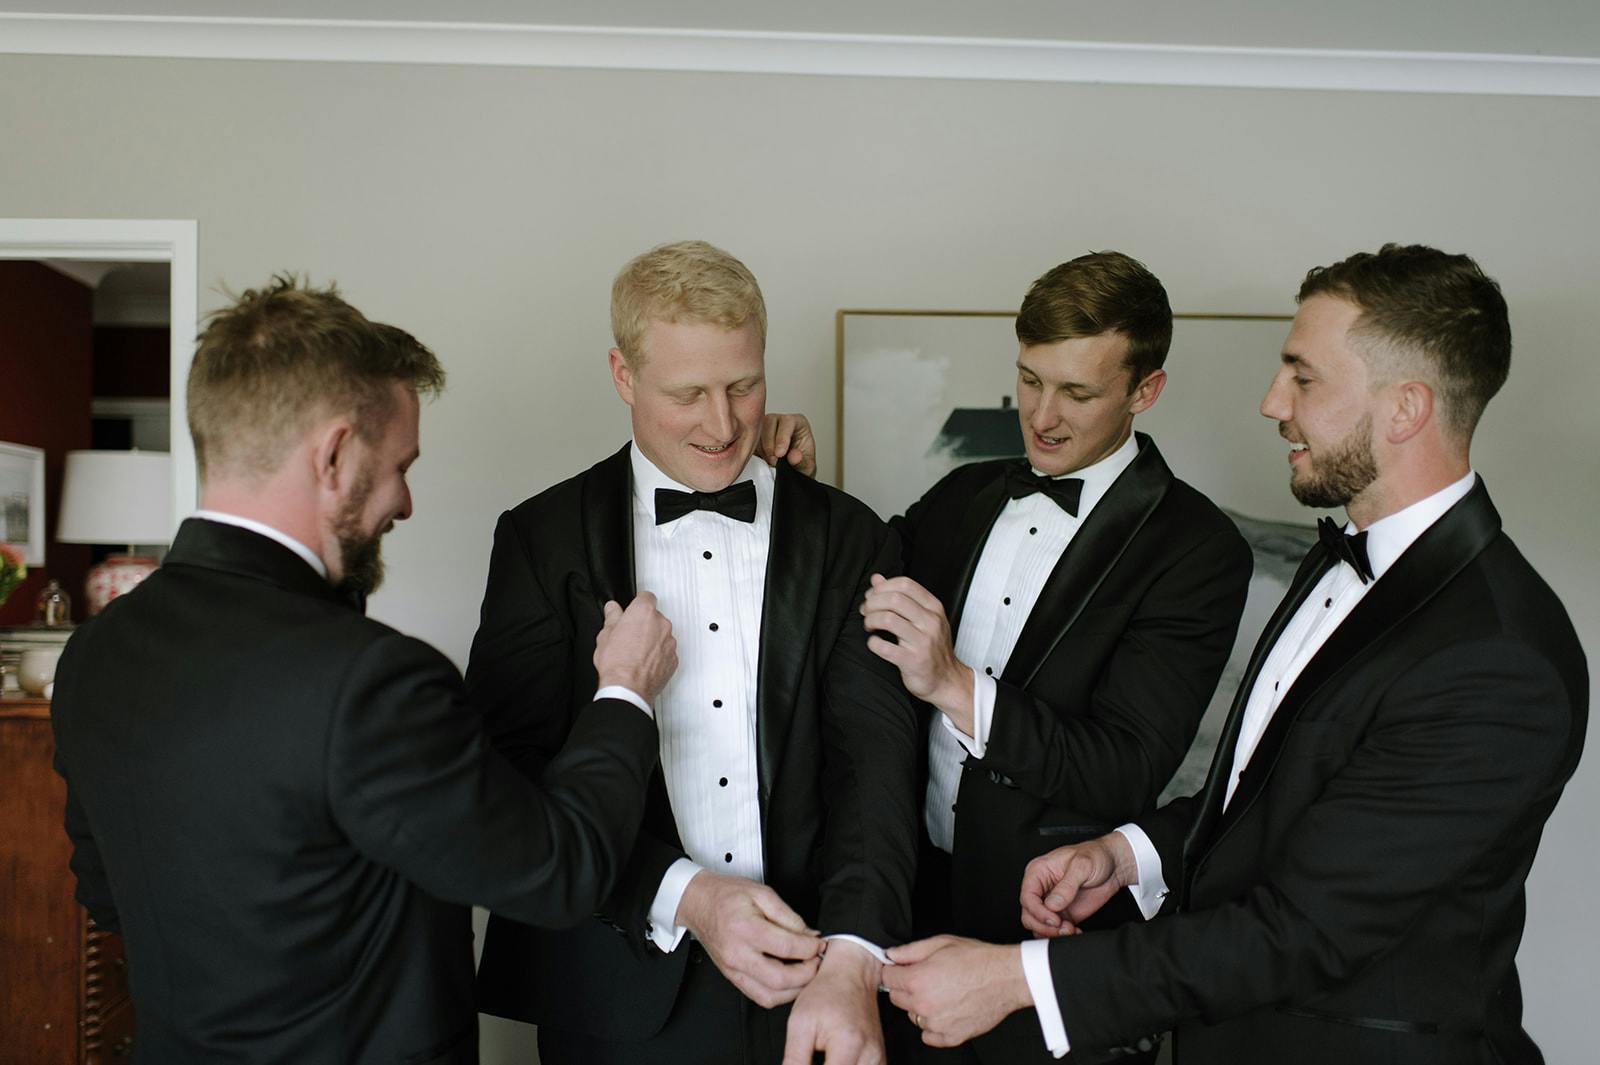 Four groomsmen in tuxedos are adjusting the groom's attire and bow tie. They are inside a room with light-colored walls and a piece of framed art in the background. The atmosphere appears joyful as they prepare for a formal event.